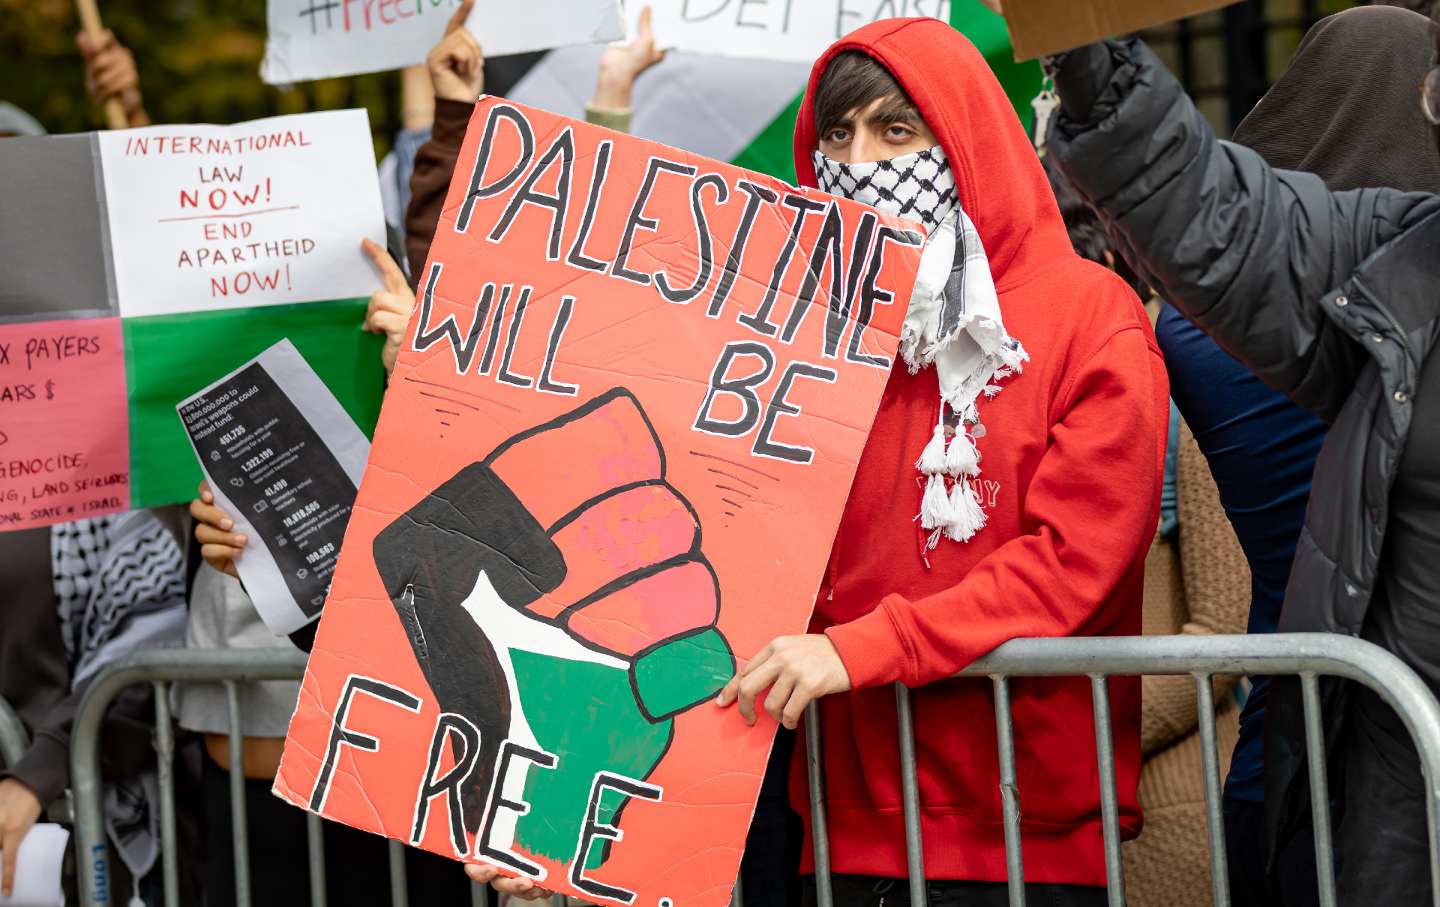 Students from Brooklyn College and supporters hold signs during a pro-Palestinian demonstration at the entrance of the campus.